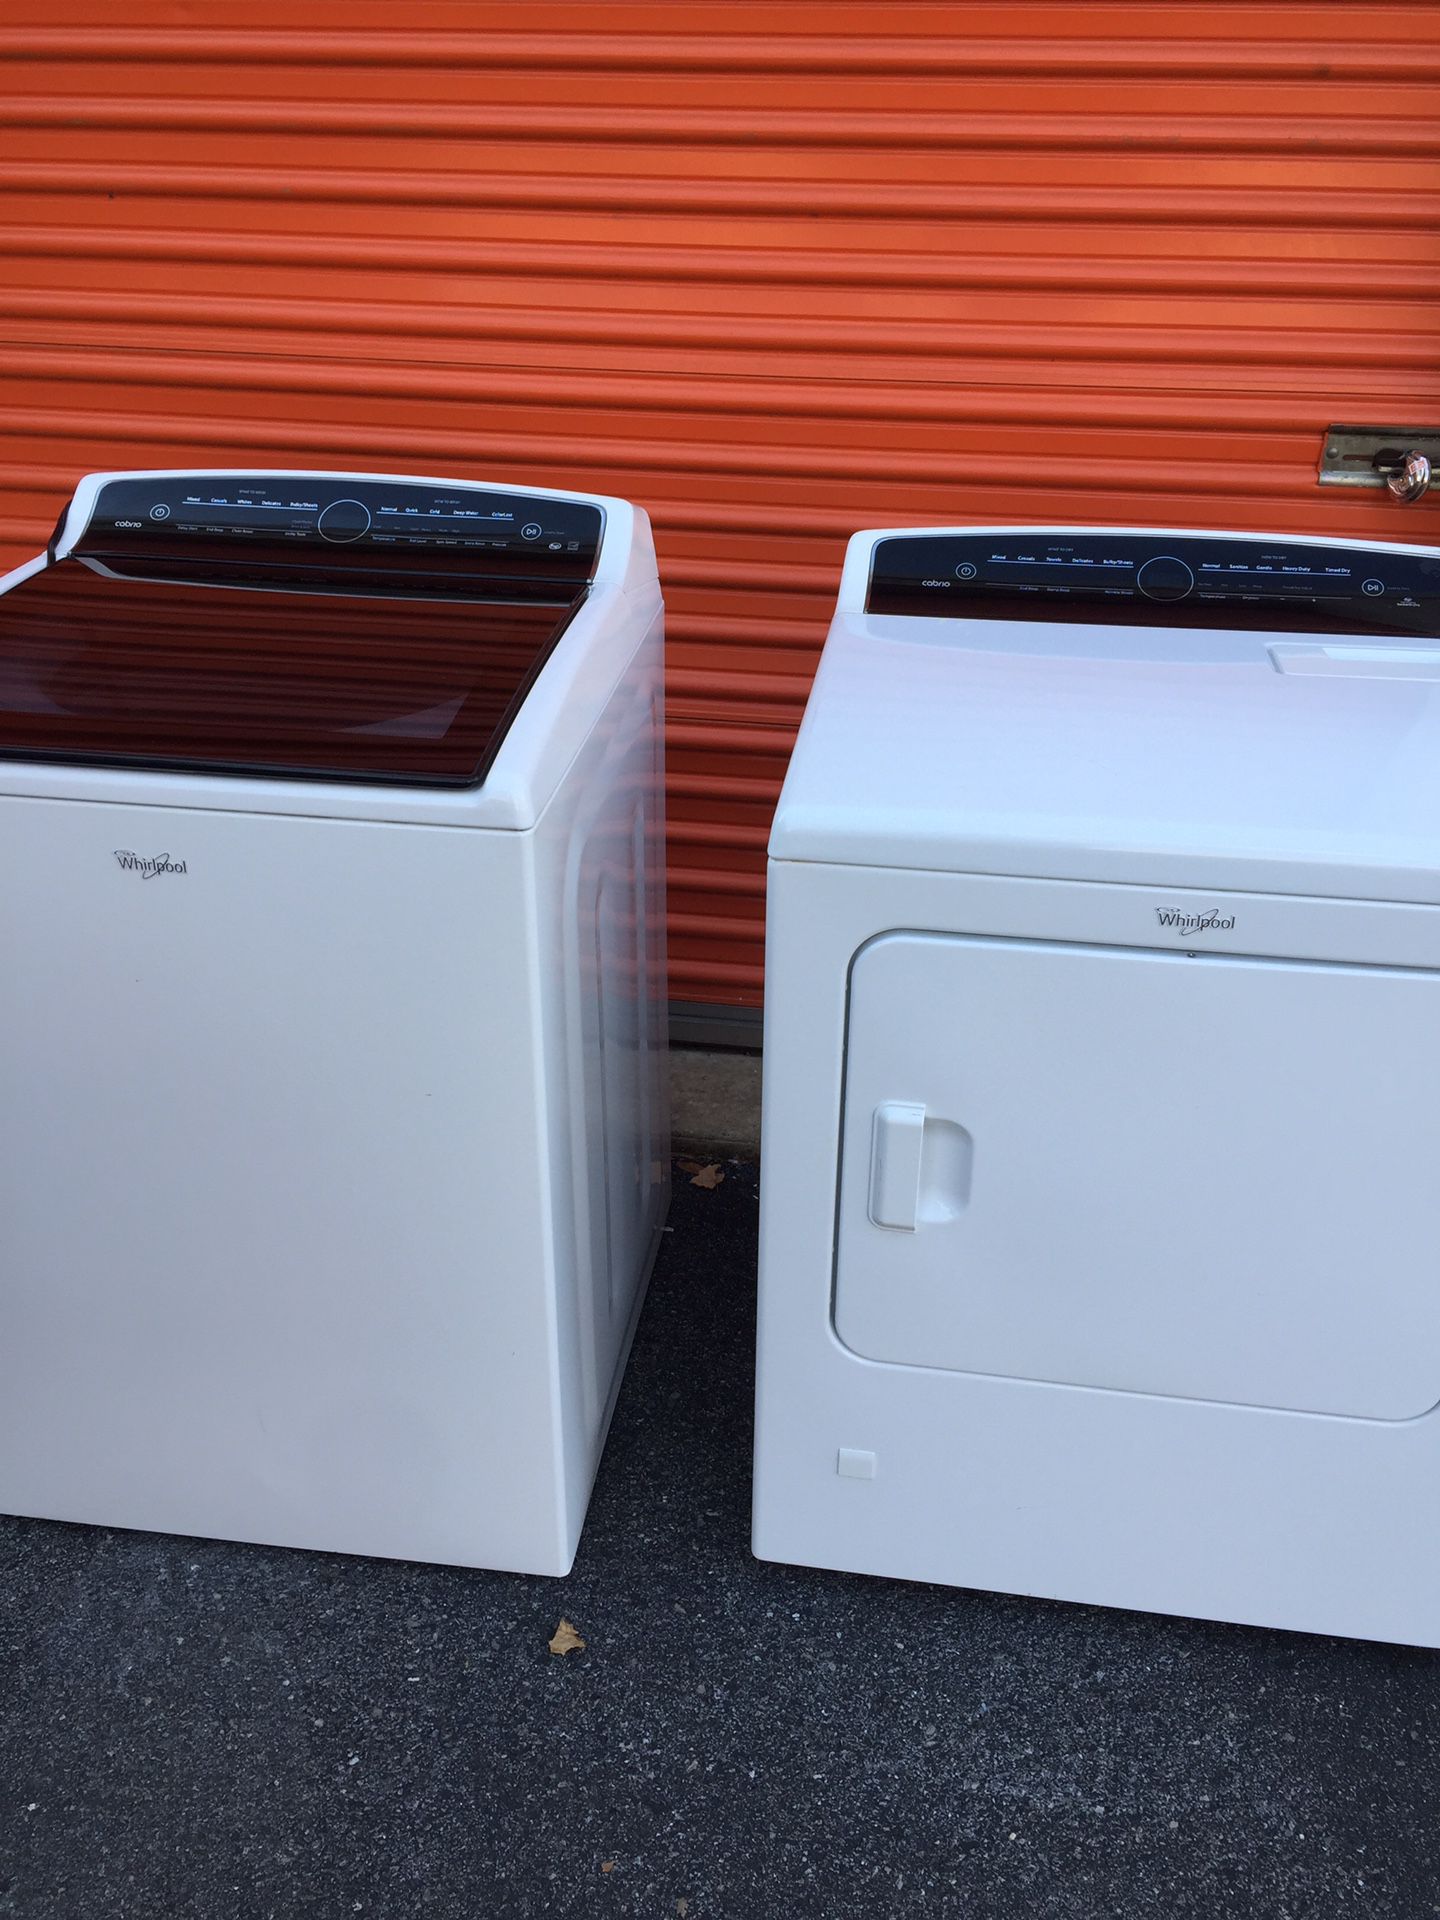 Whirlpool cabrio washer and dryer